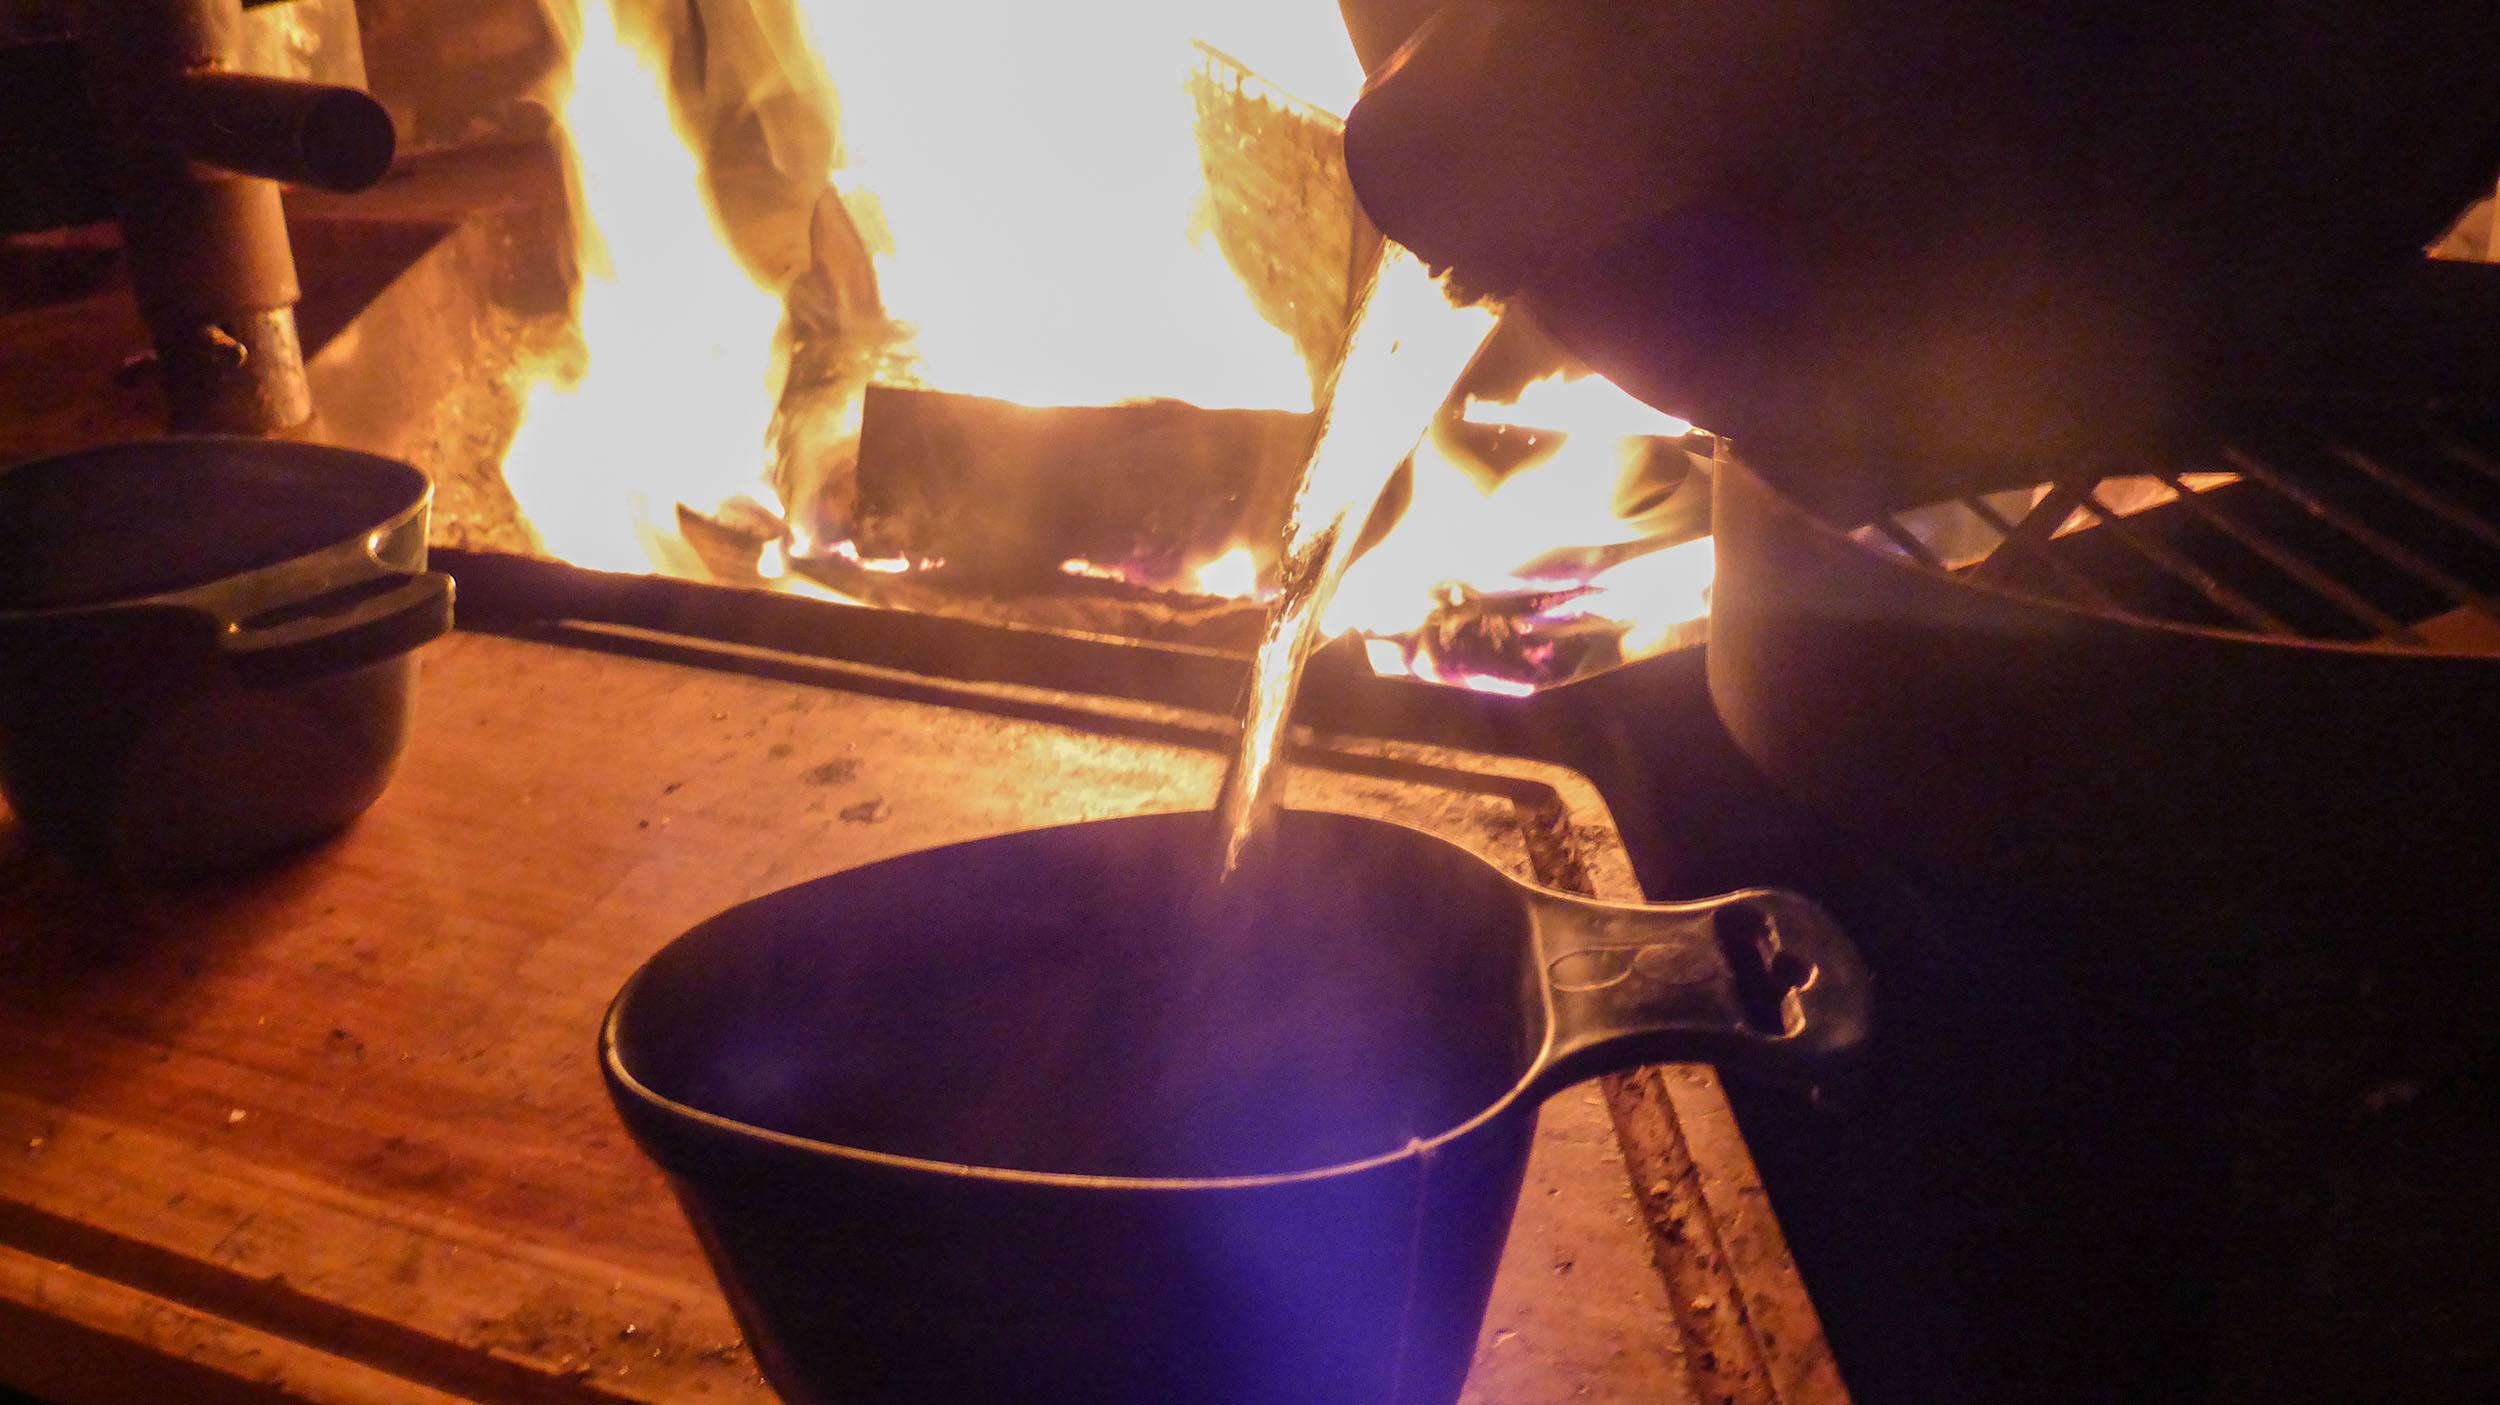 Boiling water being poured into a cup inside a cabin at Camp Alta in Sweden